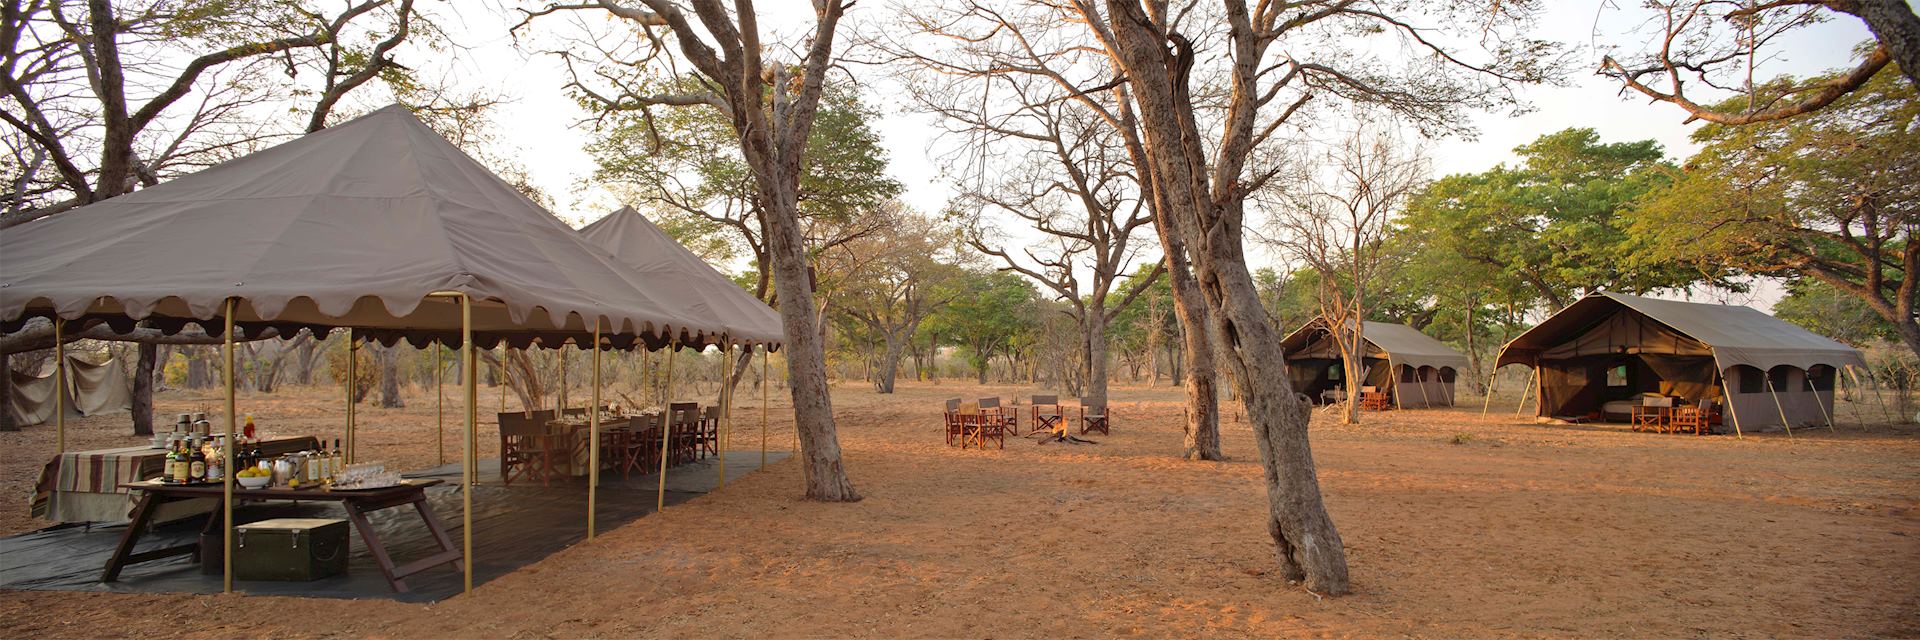 Guest area at Chobe Under Canvas, Chobe National Park